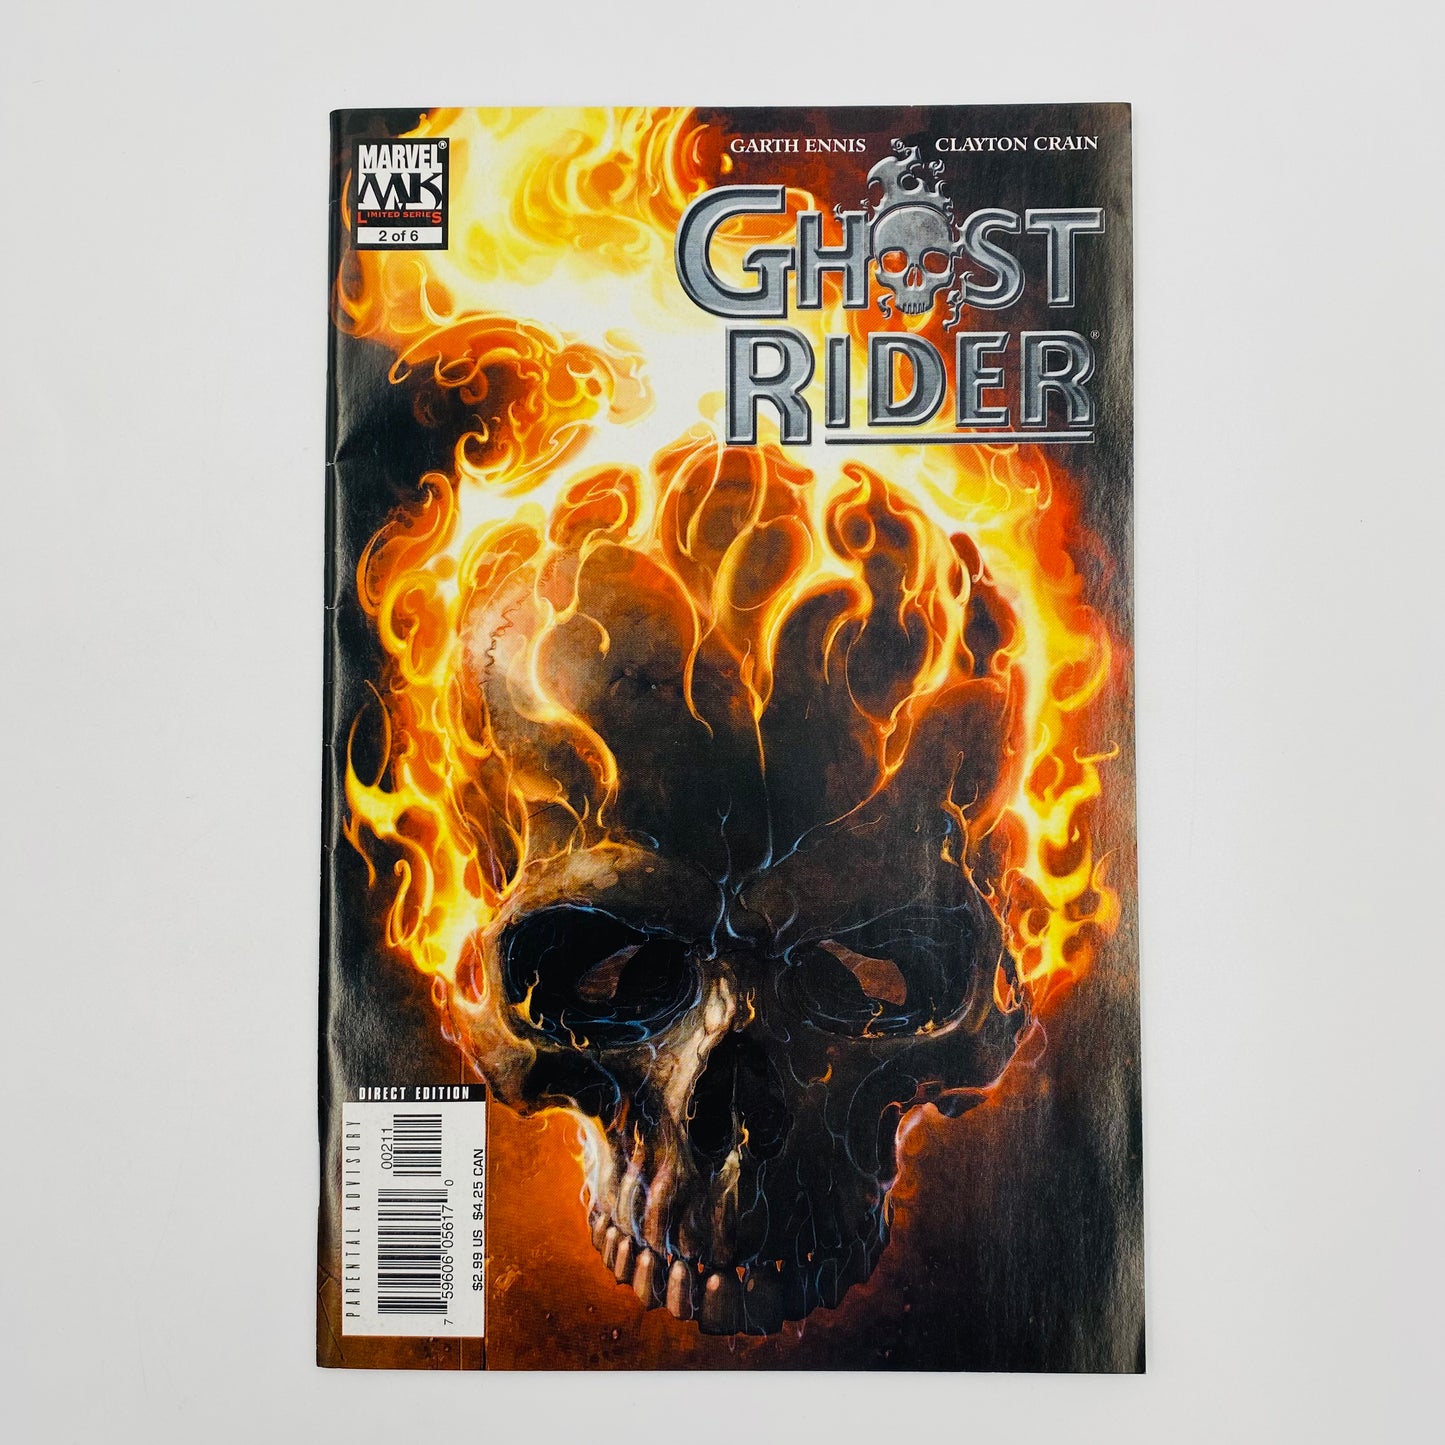 Ghost Rider #1-6 “Road to Damnation” (2005-2006) Marvel Knights